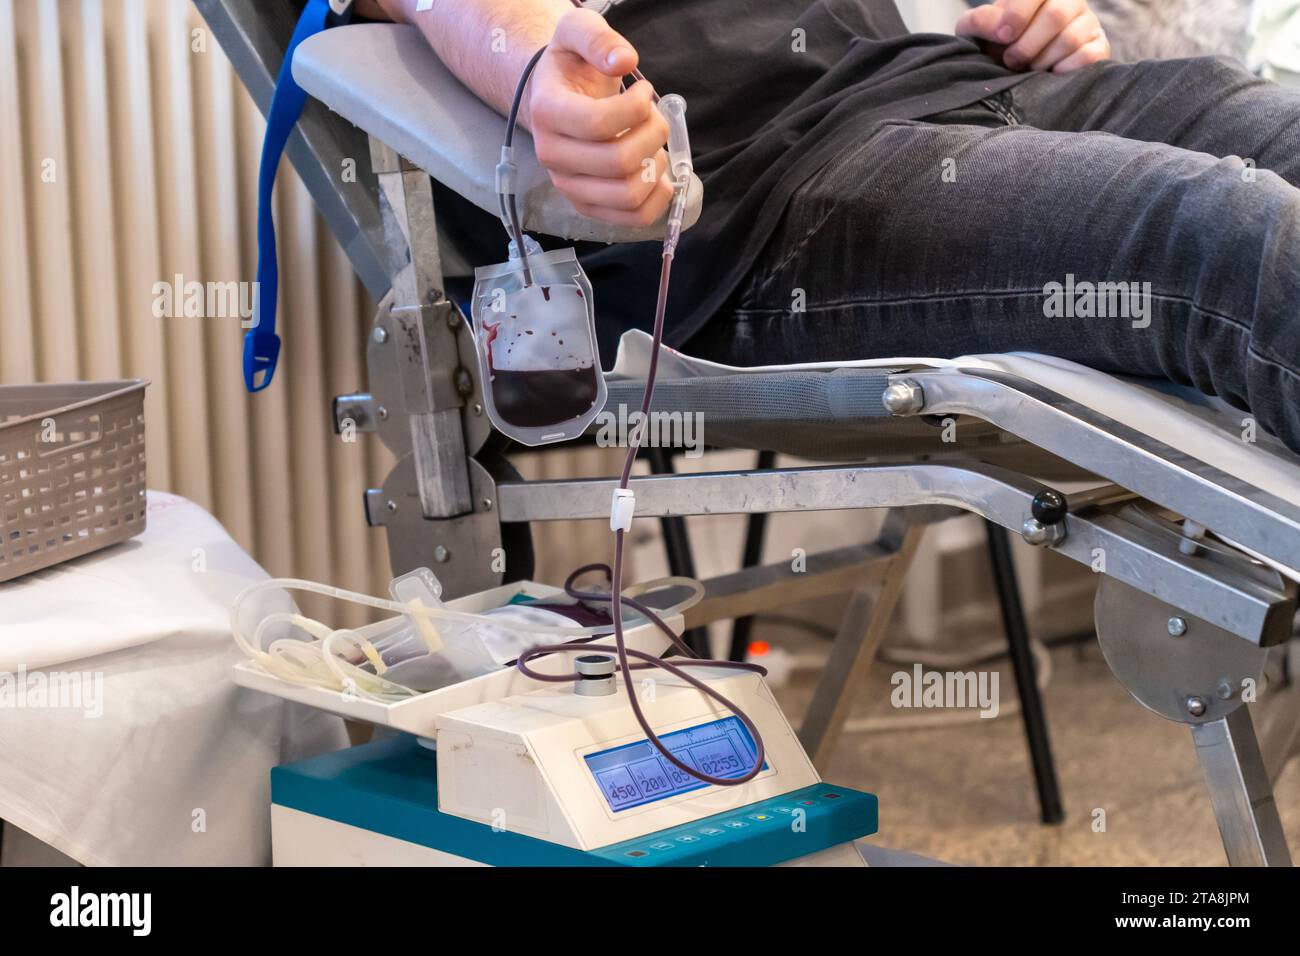 Equipment required for blood collection during a blood donation Stock Photo